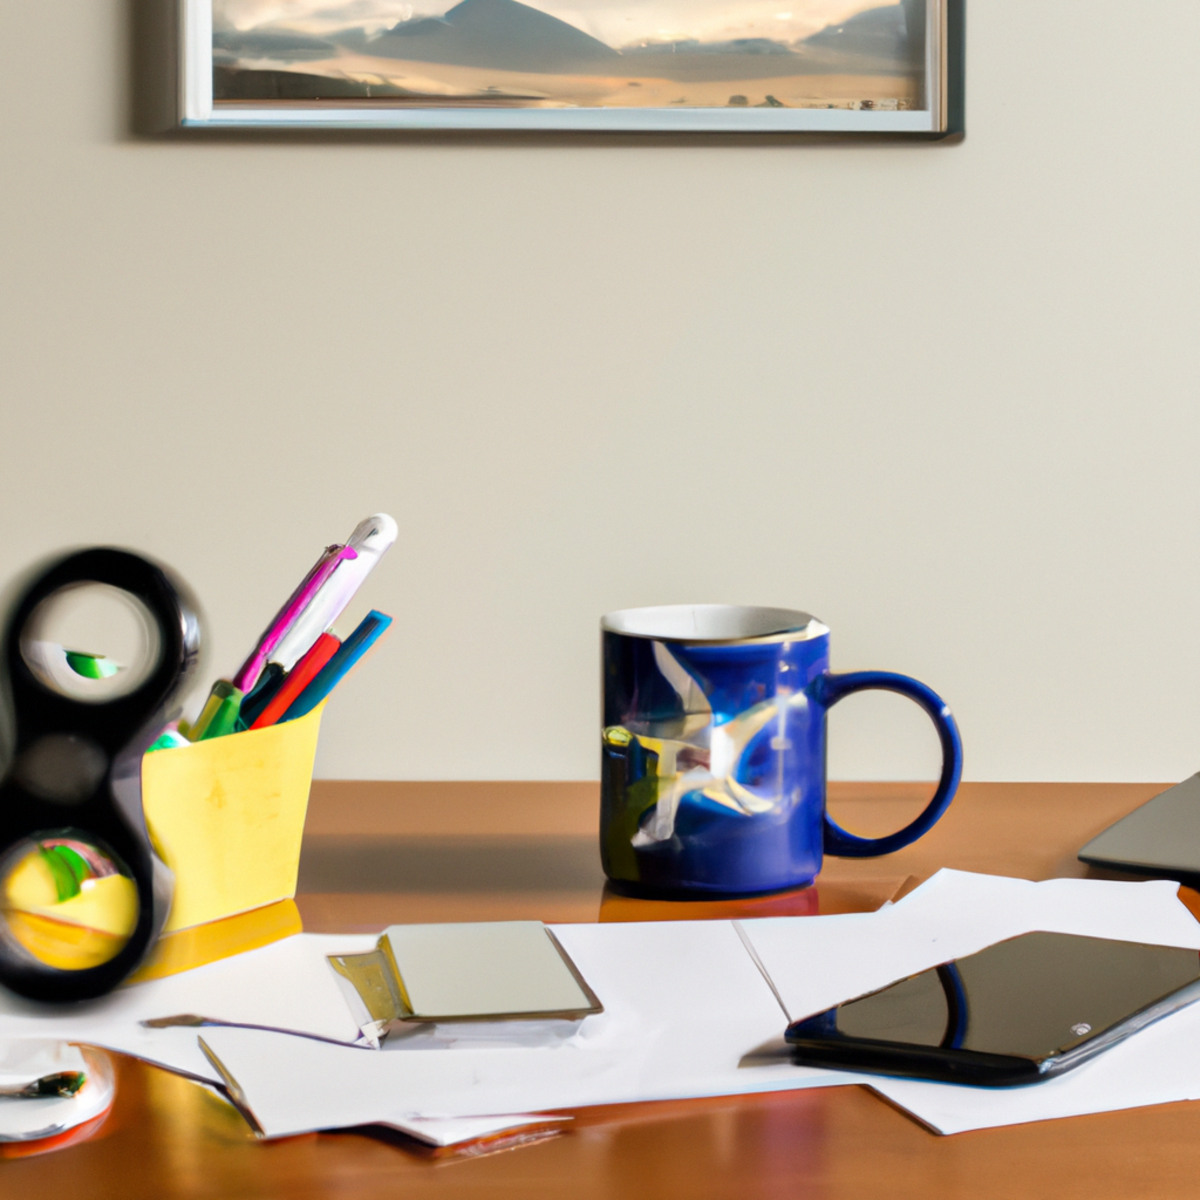 Stress management tips for busy professionals - Cluttered desk with laptop, phone, papers, stress ball, fidget spinner, and half-empty coffee mug. Serene landscape photo on wall.